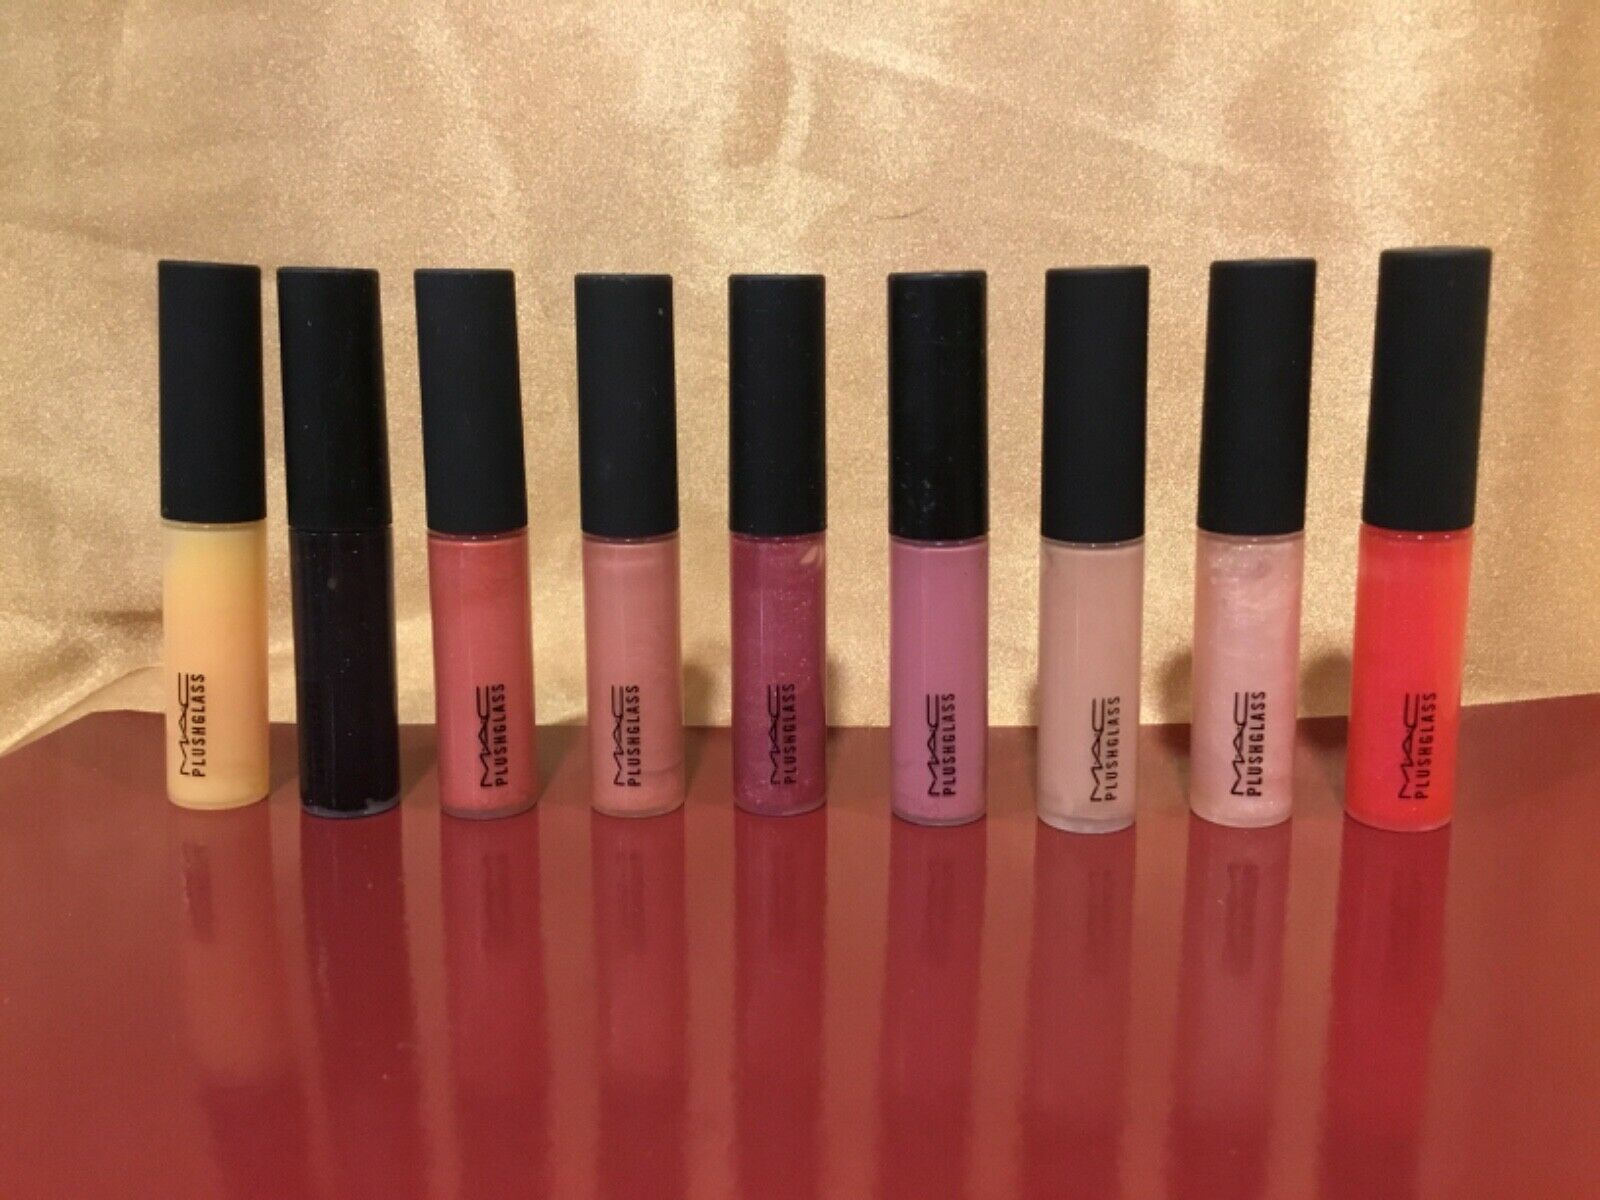 Mac Plushglass Lip Gloss Over 10 Colors To Choose From Full Size Authentic Nwob!